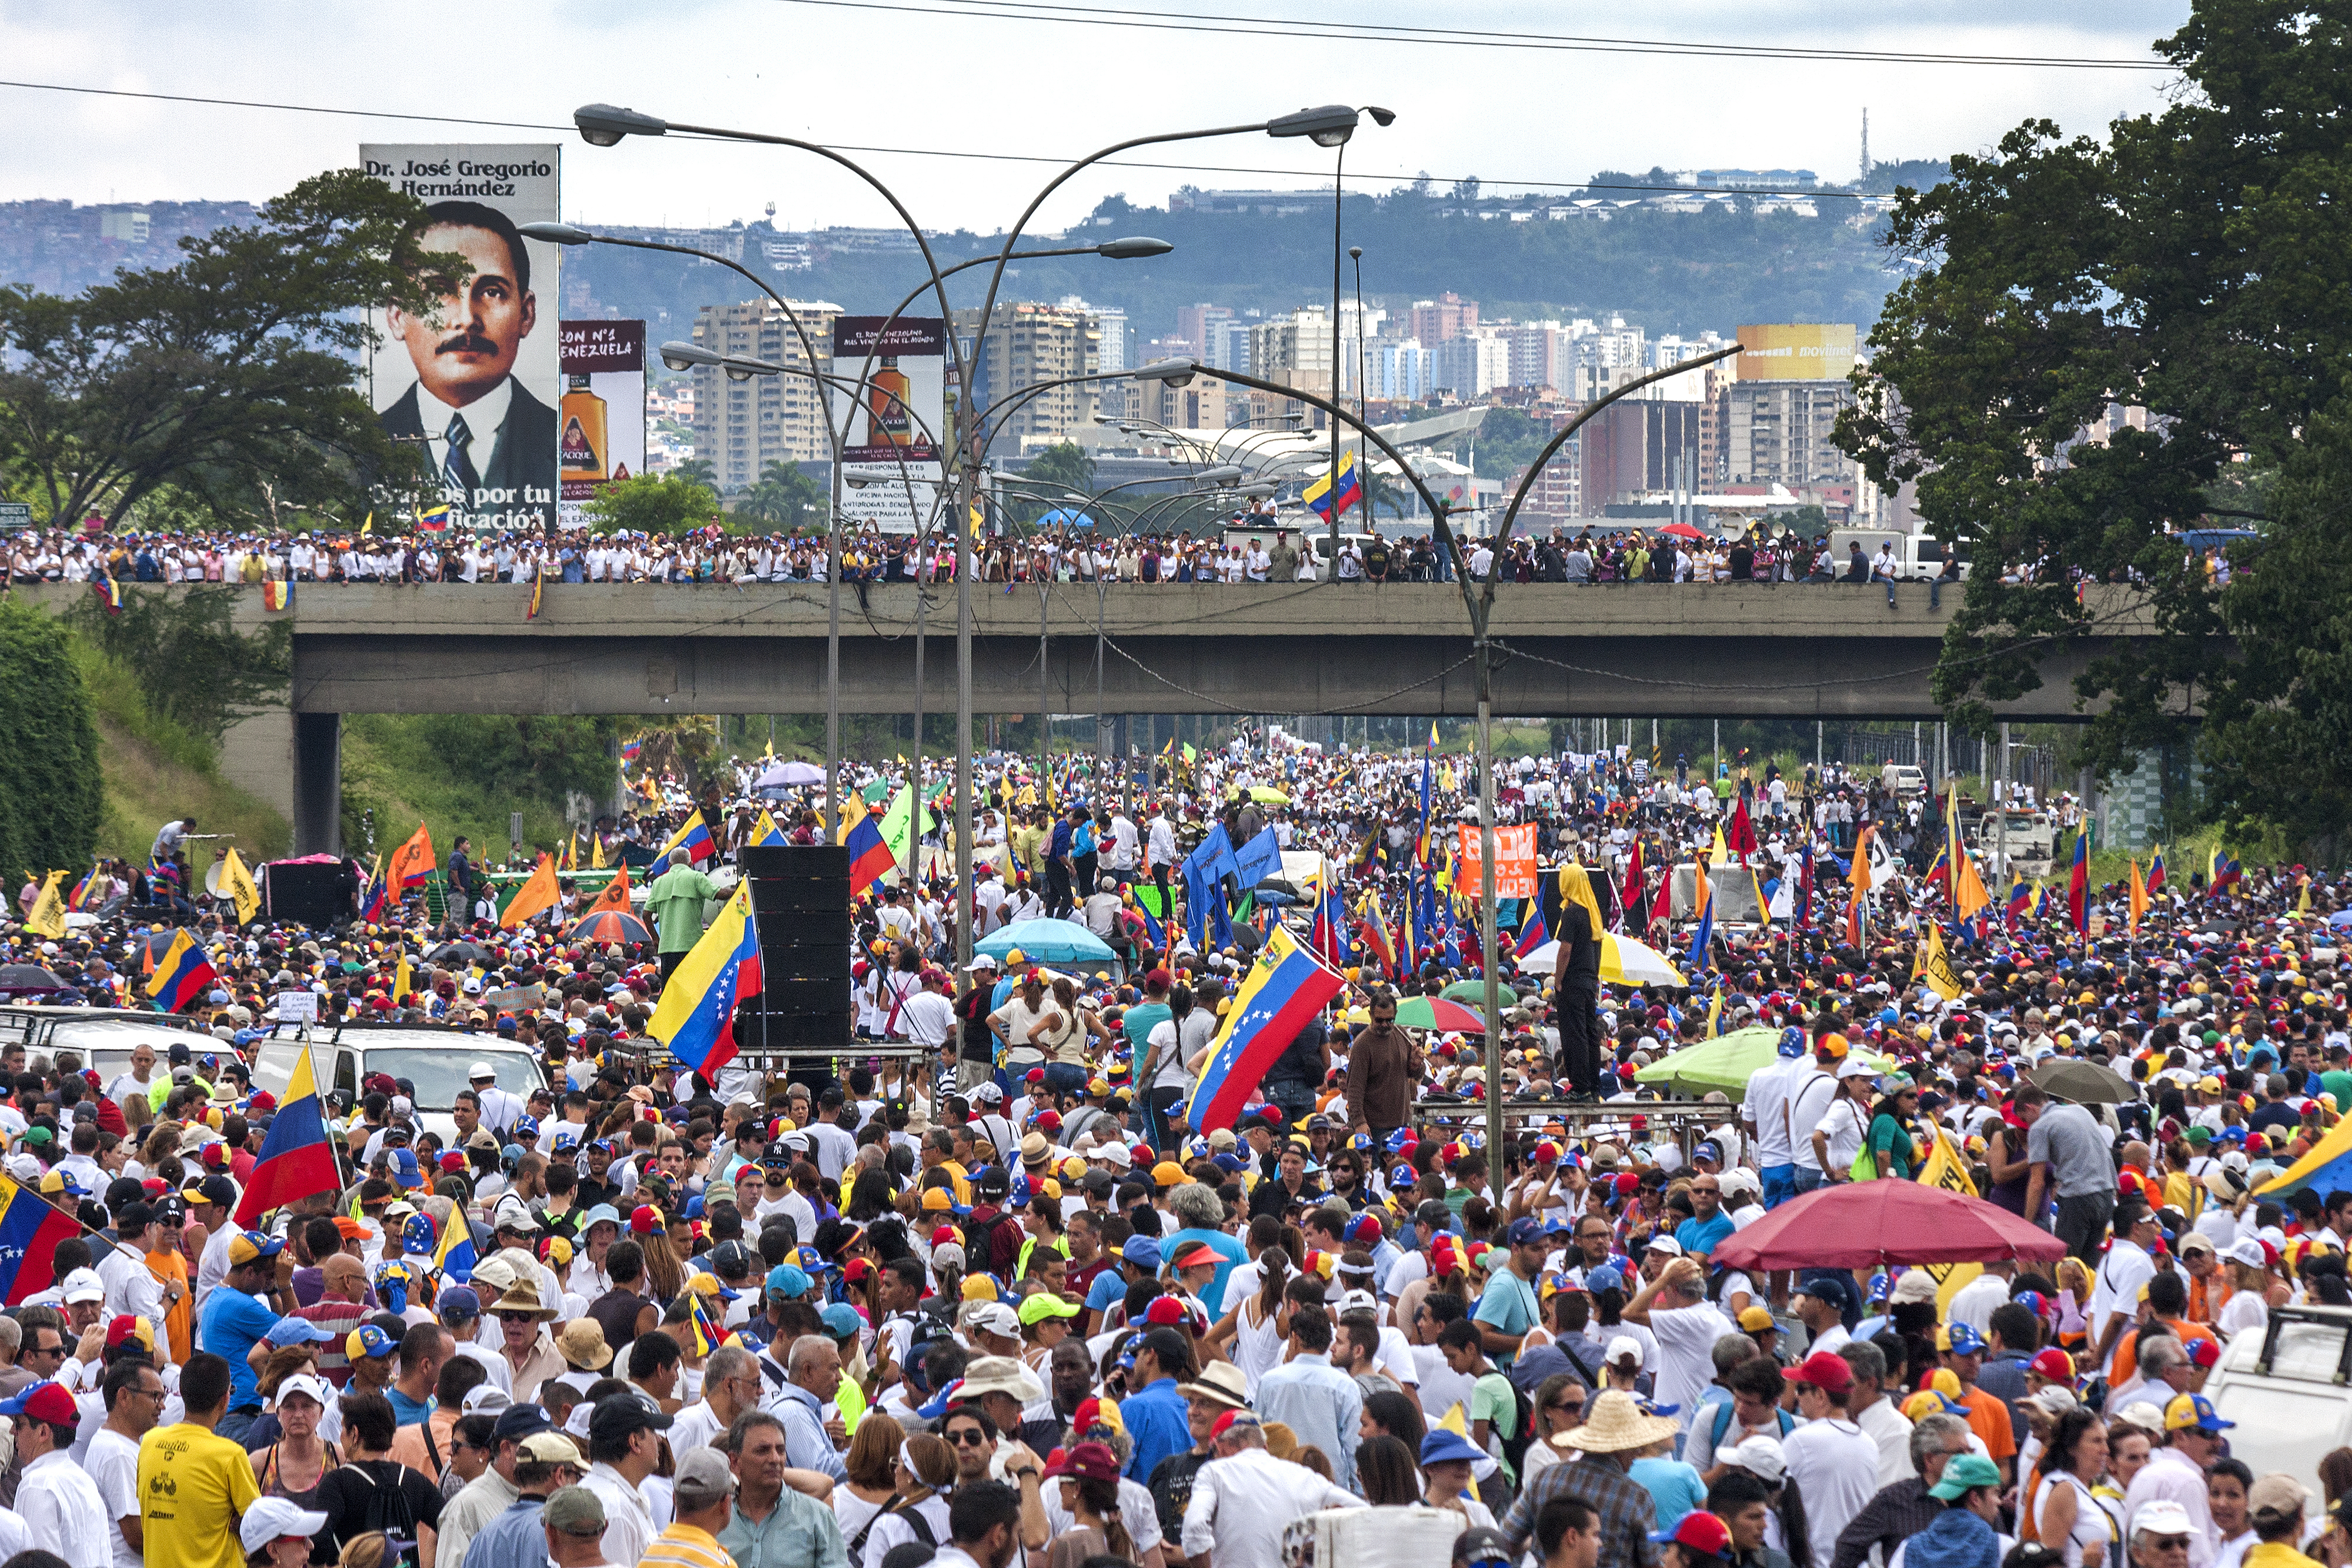 Demonstrators concentration against referendum cancellation. Caracas, Venezuela - October 26, 2016. Demonstrators concentrated protesting in Francisco Fajardo highway in Caracas against the cancellation of a constitutional referendum to revoke Venezuelan president in charge.